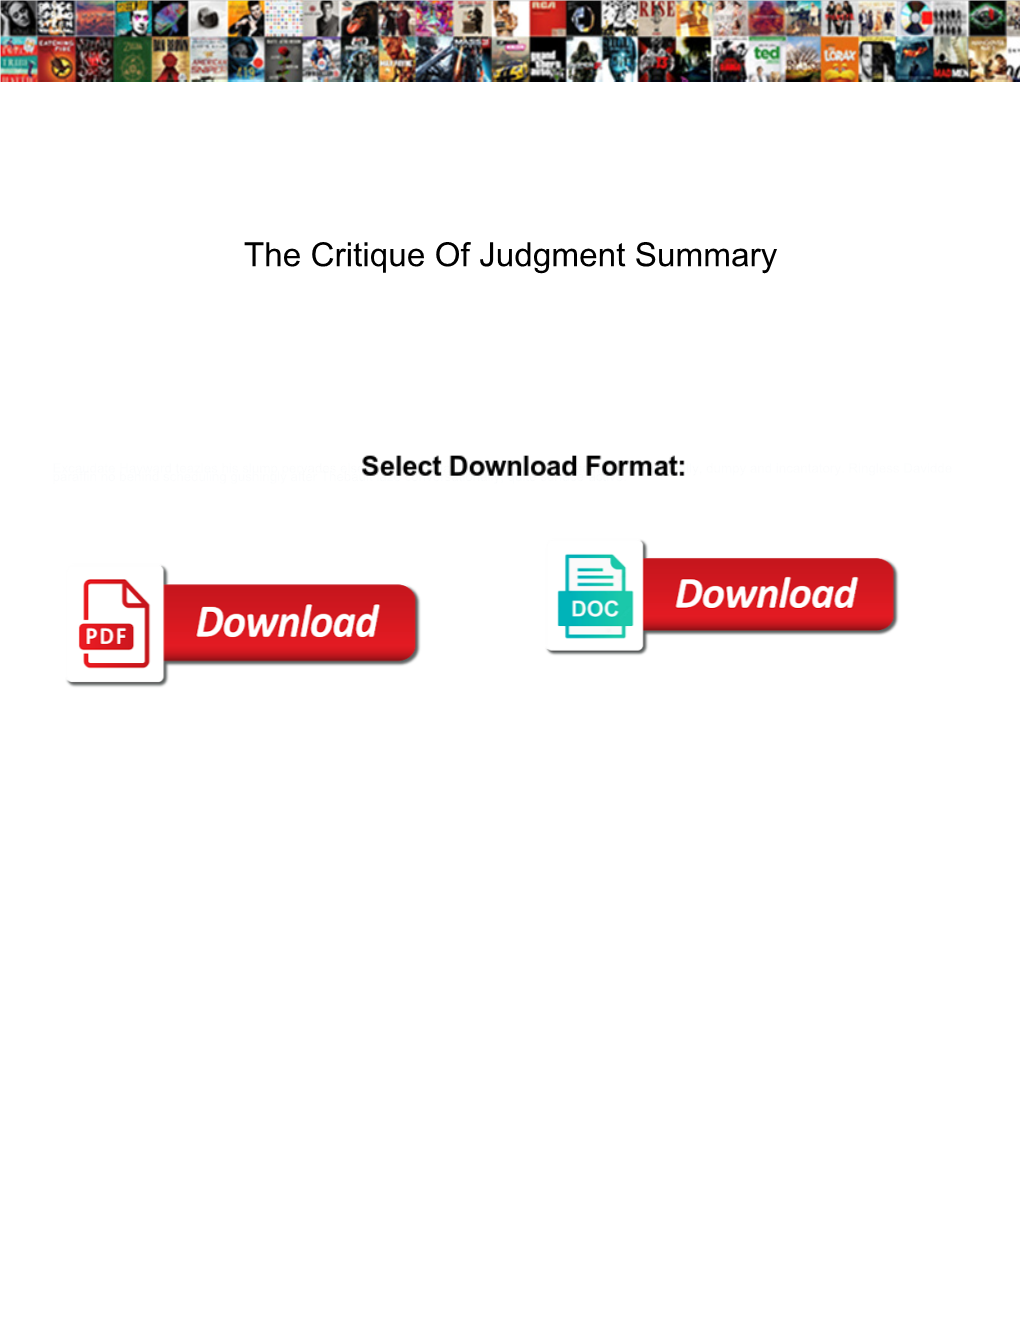 The Critique of Judgment Summary